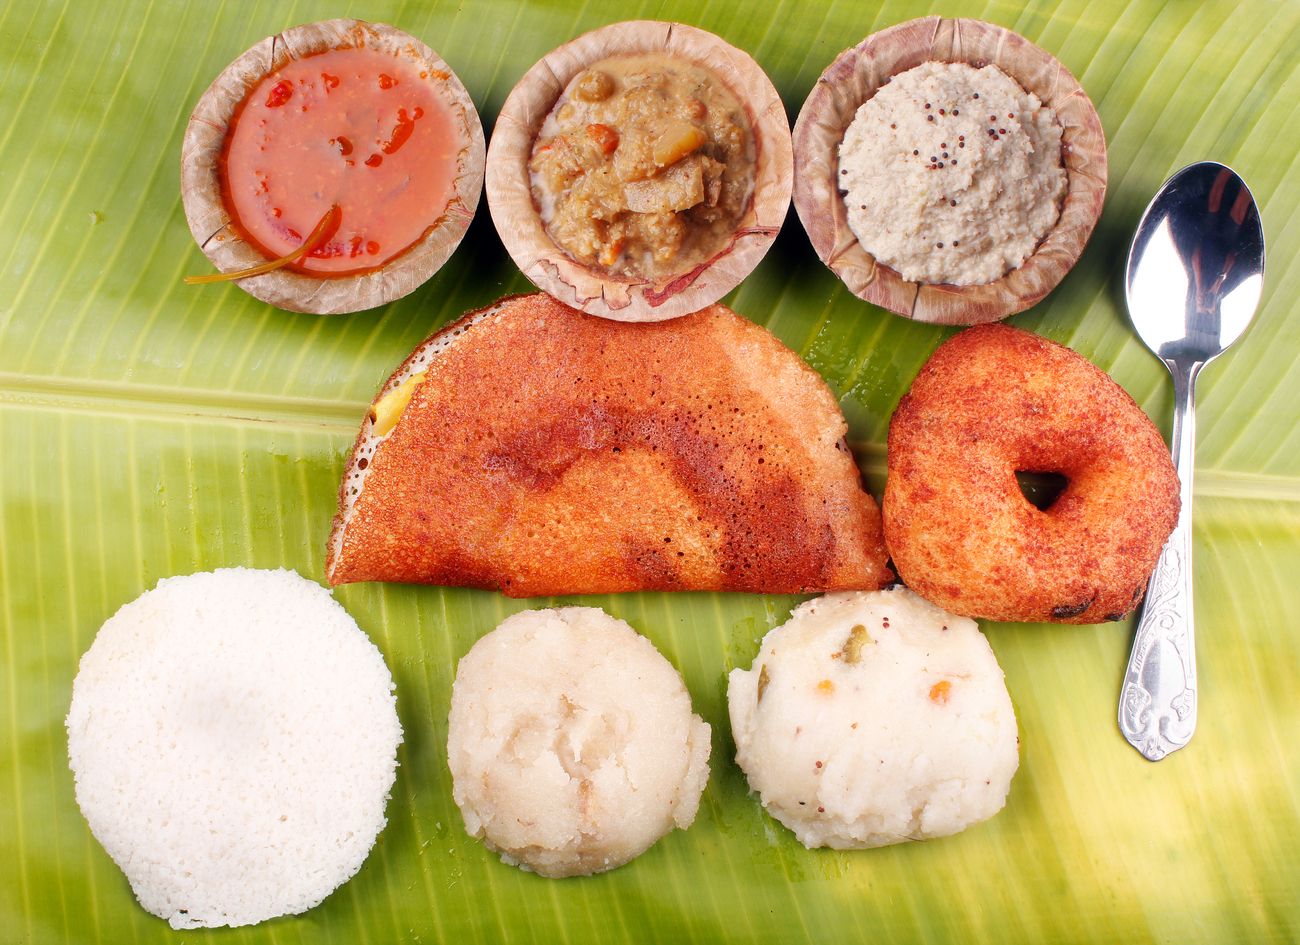 Traditional south Indian breakfasts with a platter including dosa, idli, vada, upma, kesari bath with spicy Indian curry and chutney served on a banana leaf 